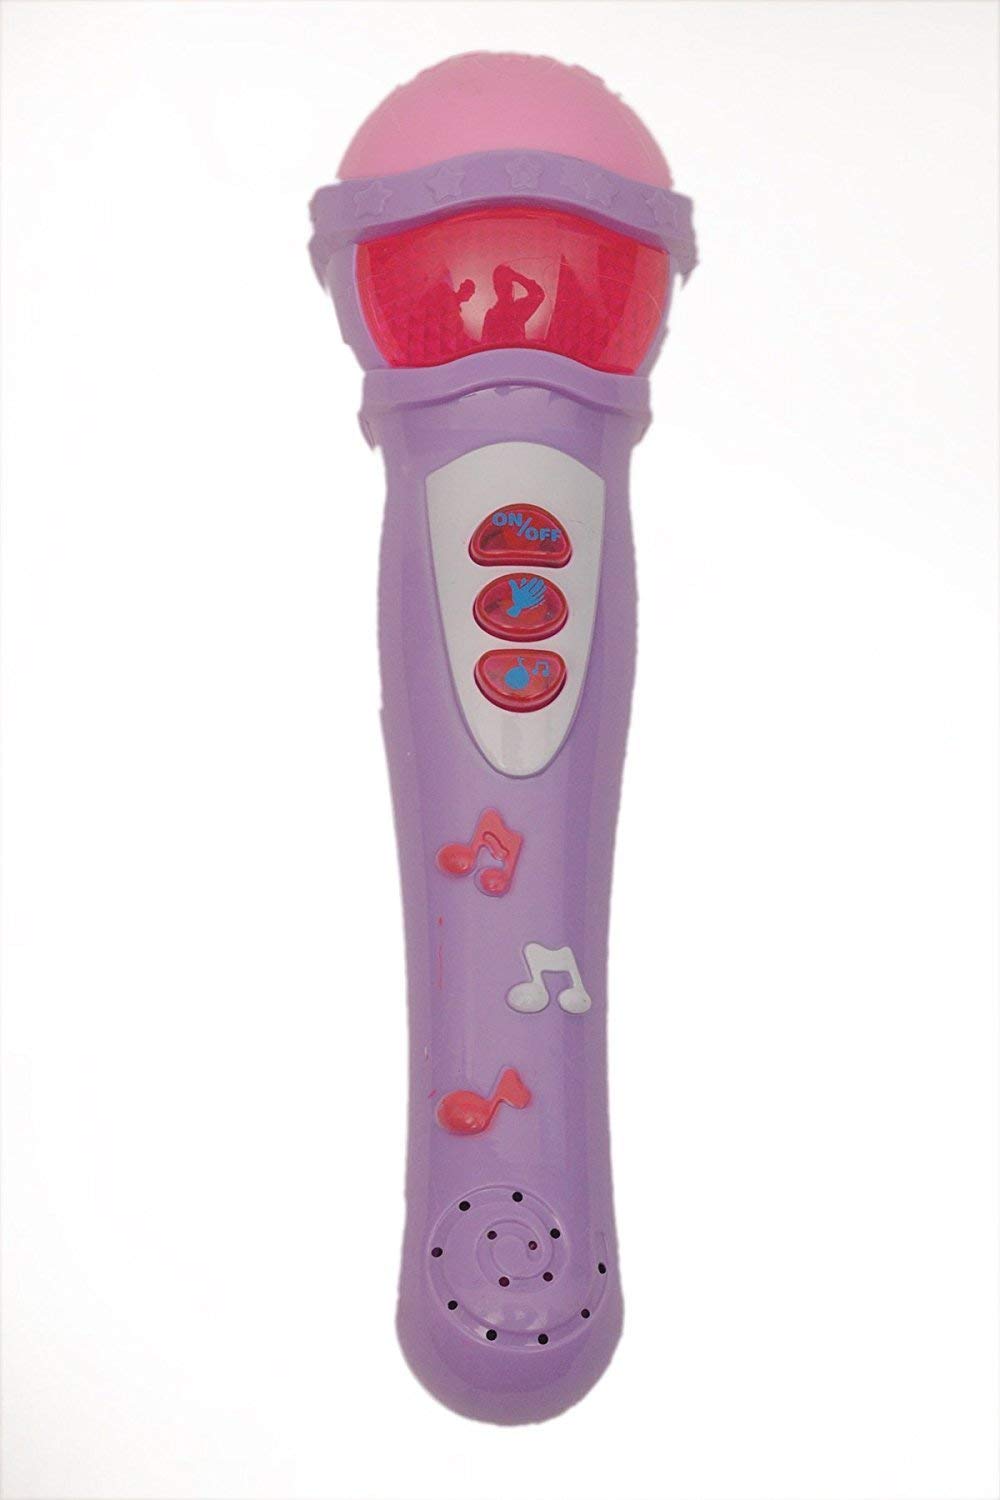 Toyshine Musical Microphone Singing Mic Toy with Lights and Sound